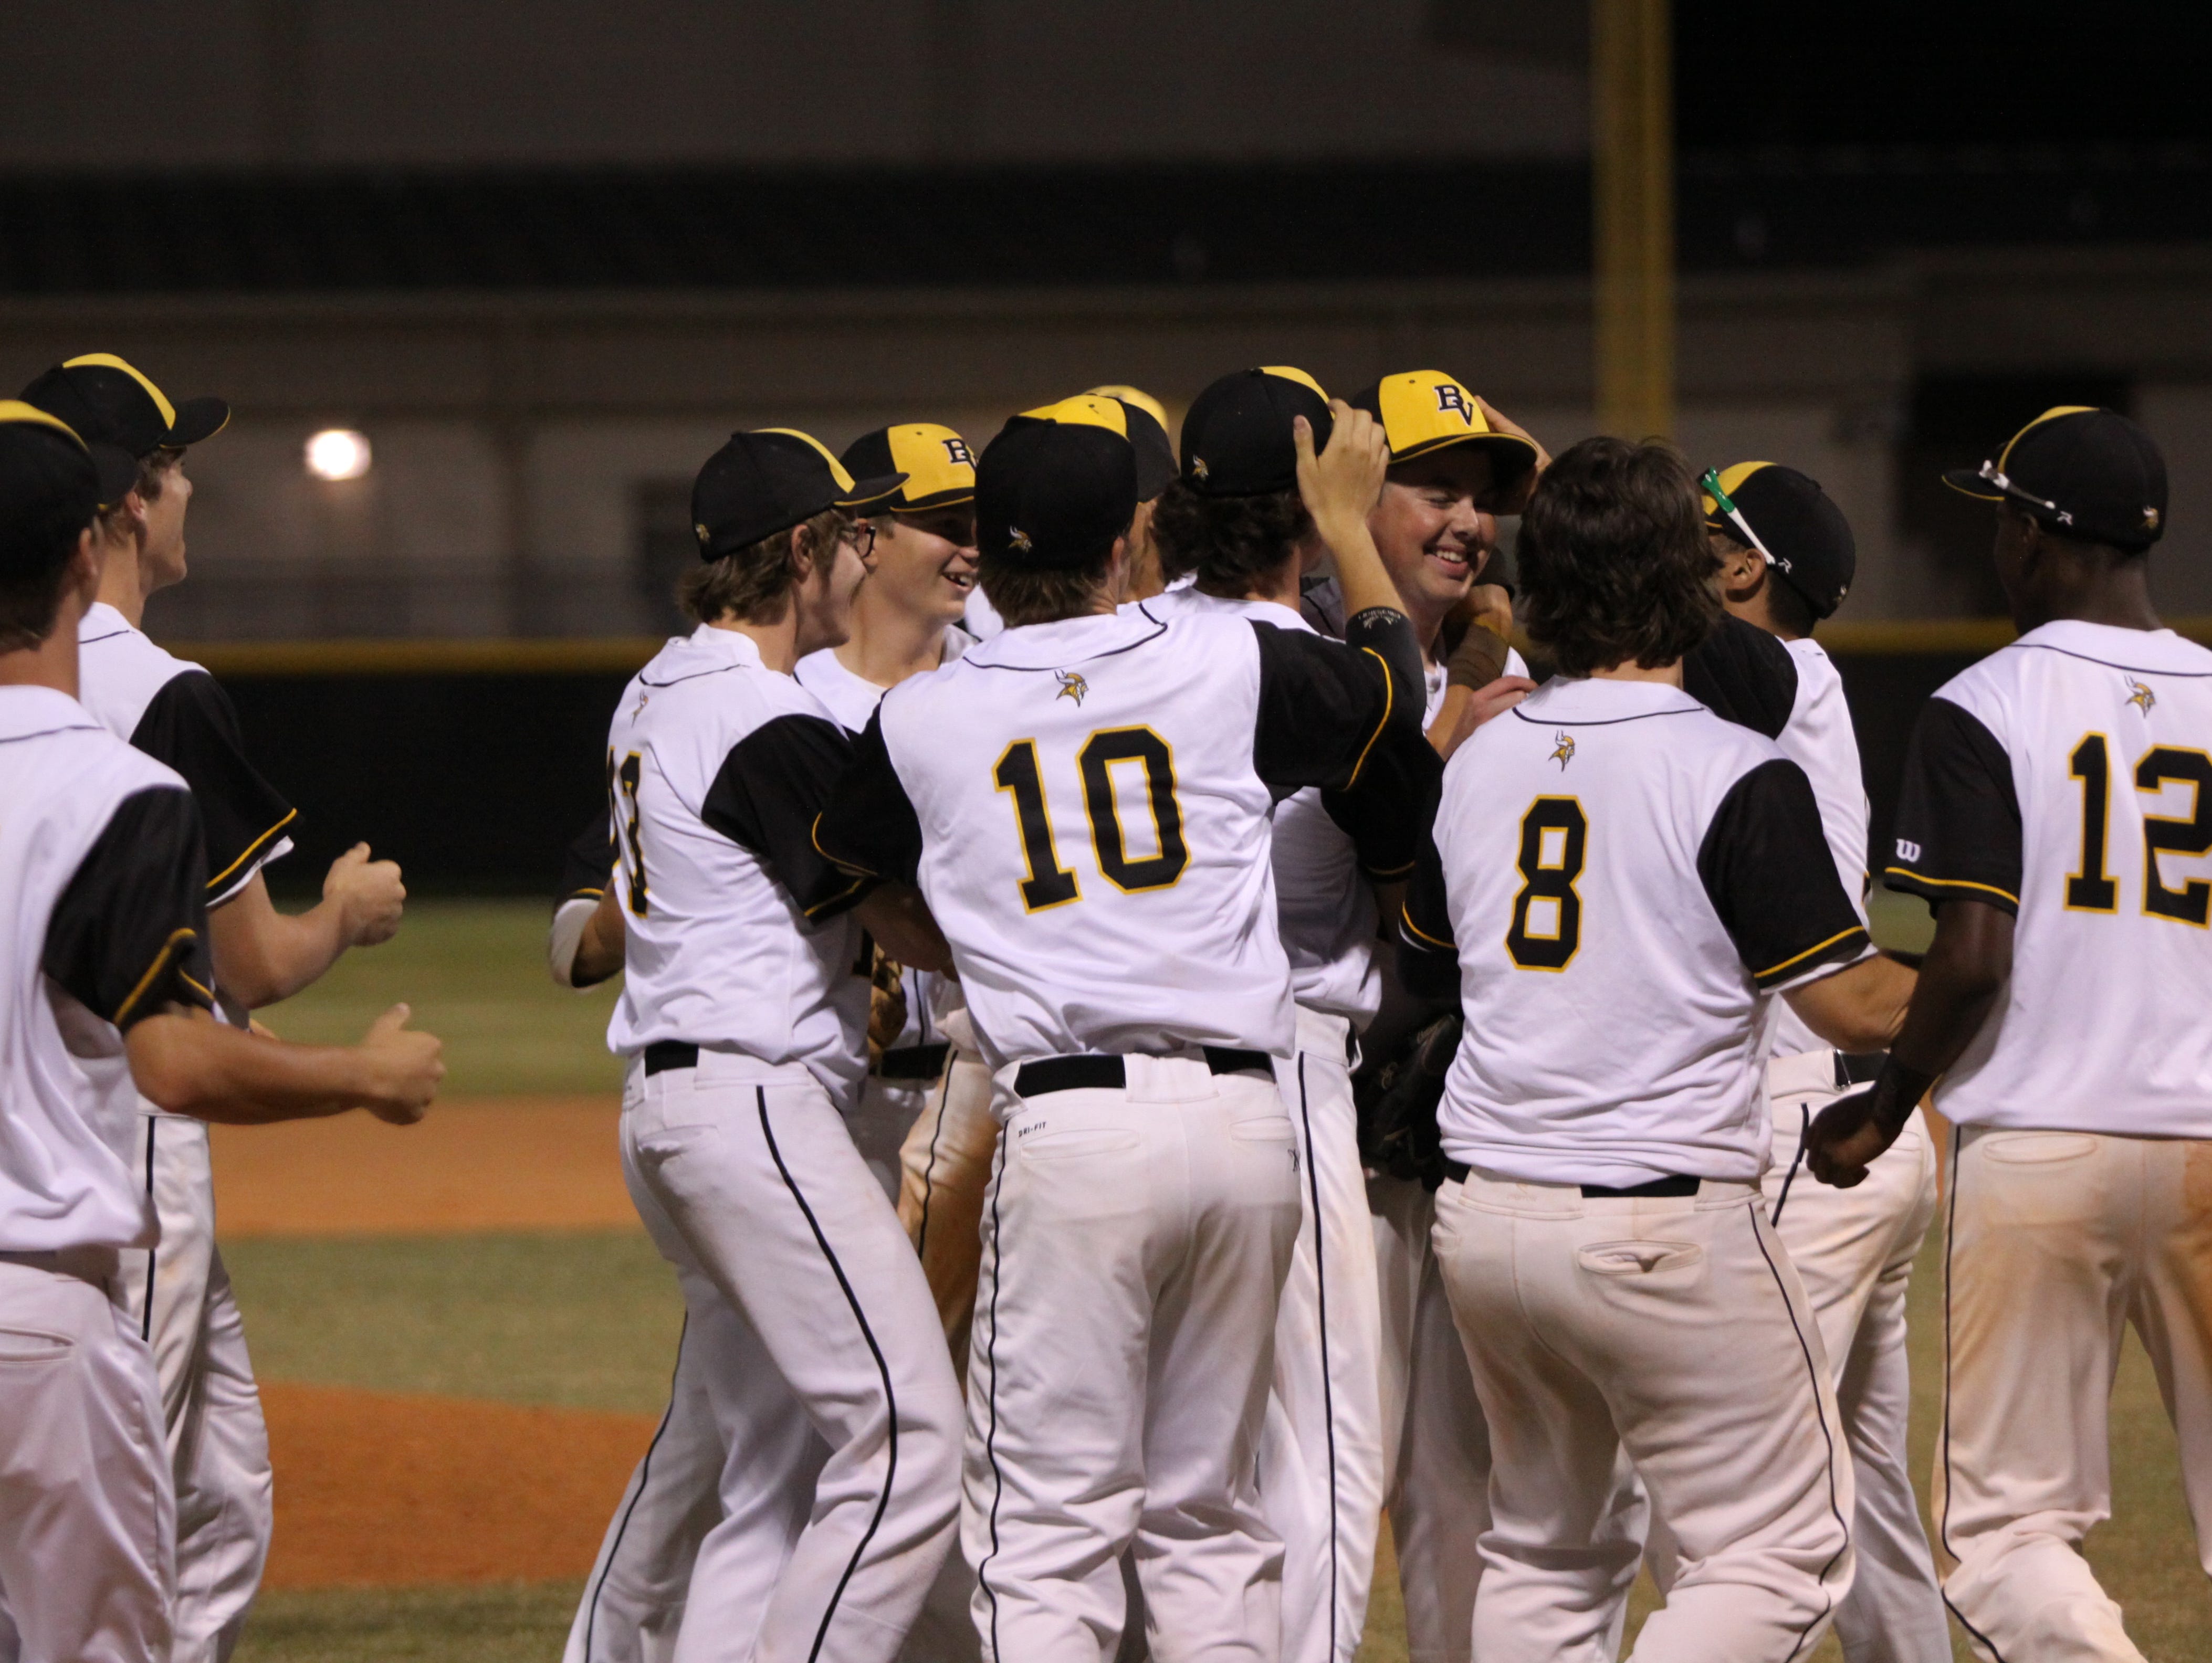 The Bishop Verot baseball team mobs senior Jaret Rusnell after he finishes off the final two outs of the team's game on April 7.